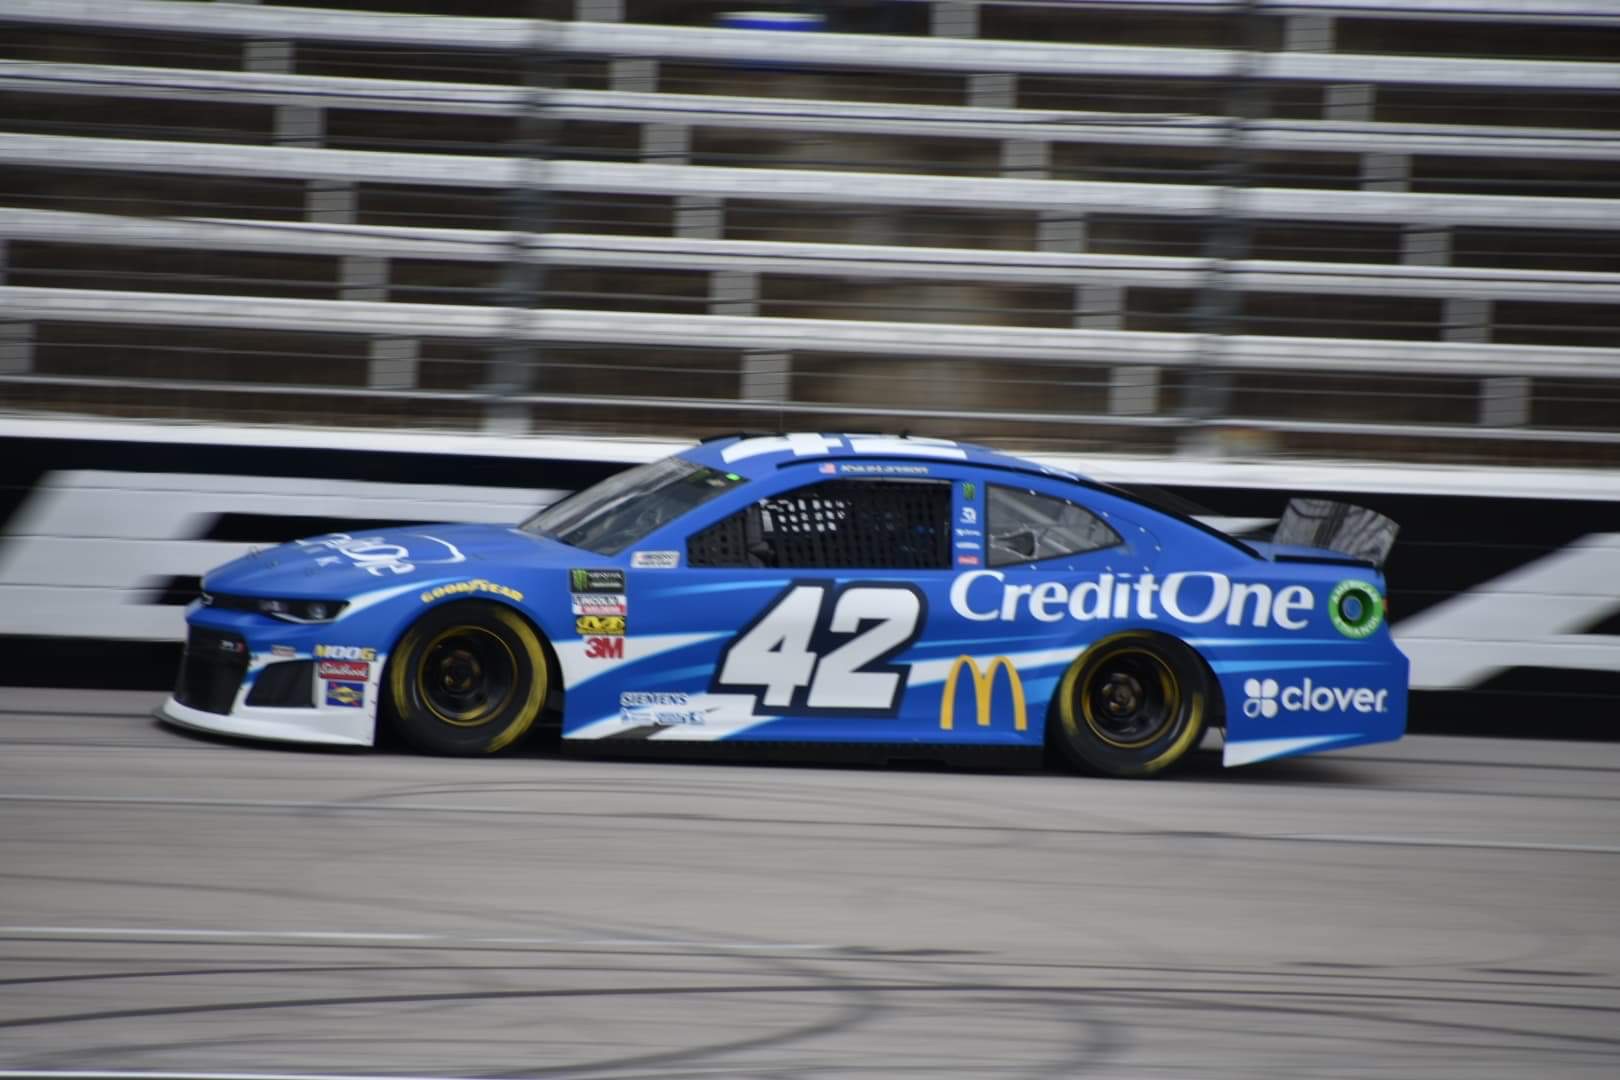 Larson had one of the faster long run speeds in final Cup practice at Texas. (Photo Credit: Sean Folsom/TPF)